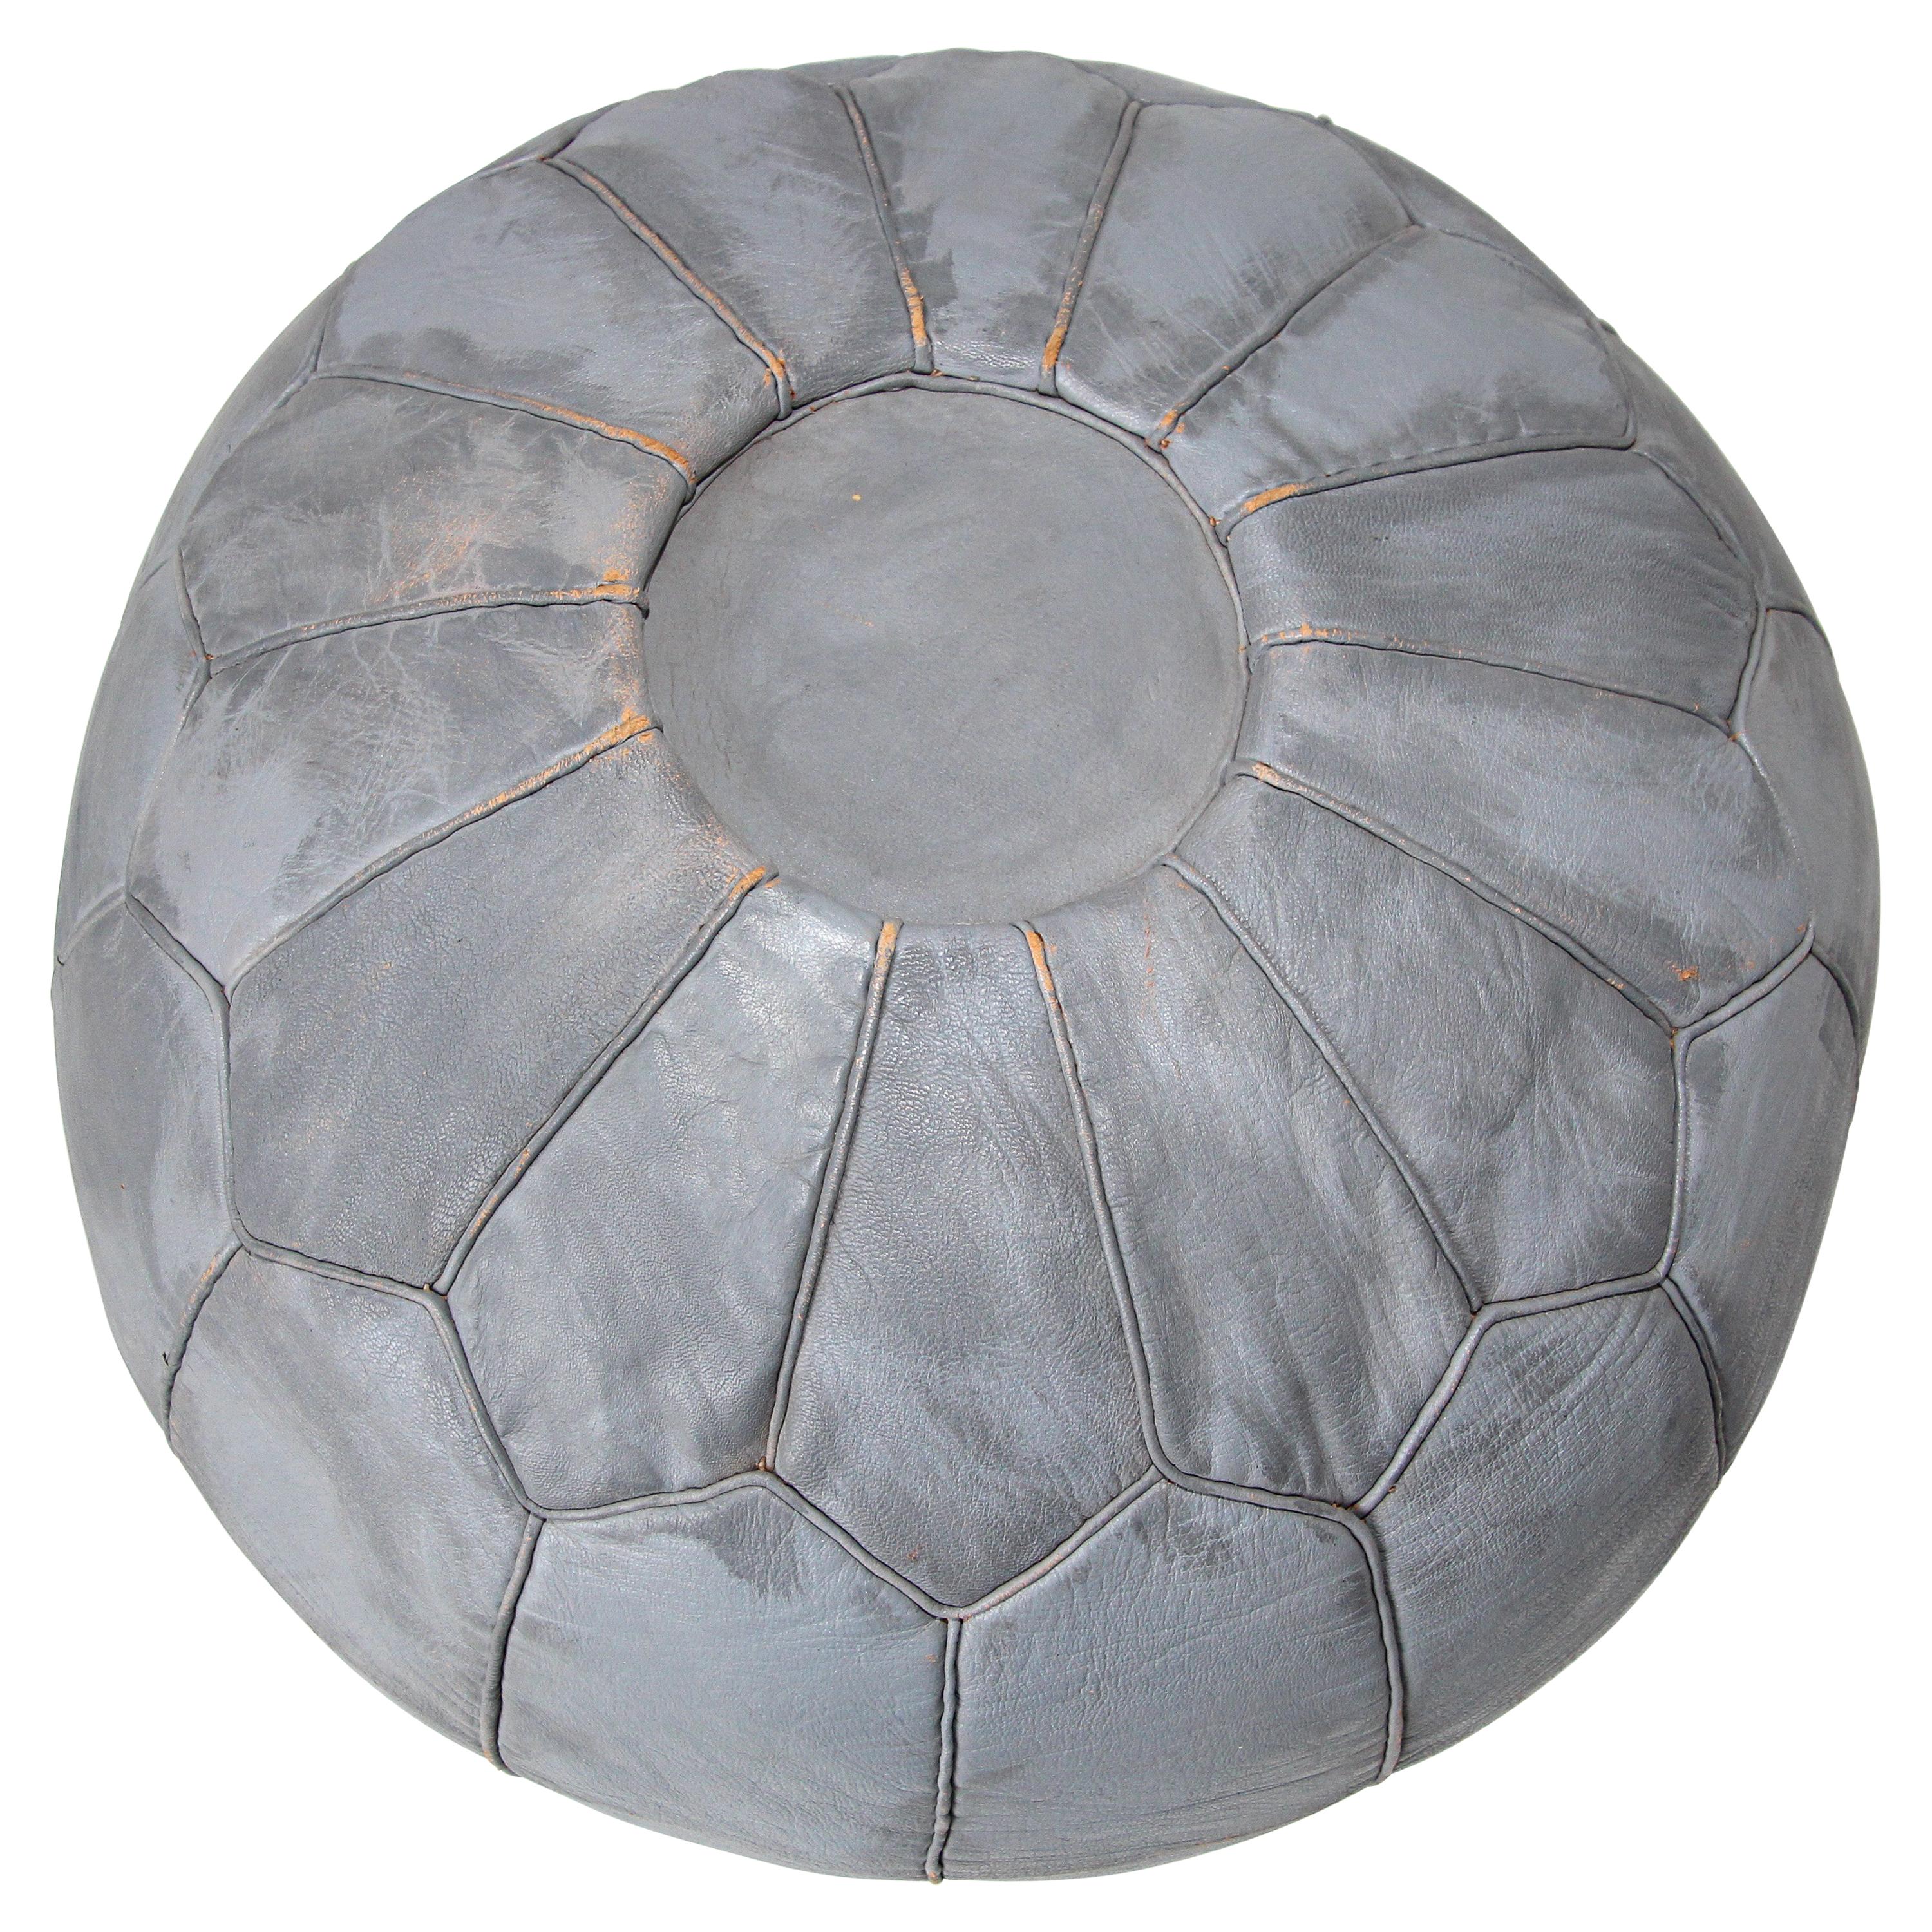 Vintage Moroccan Round Leather Pouf Hand-Tooled in Fez Morocco